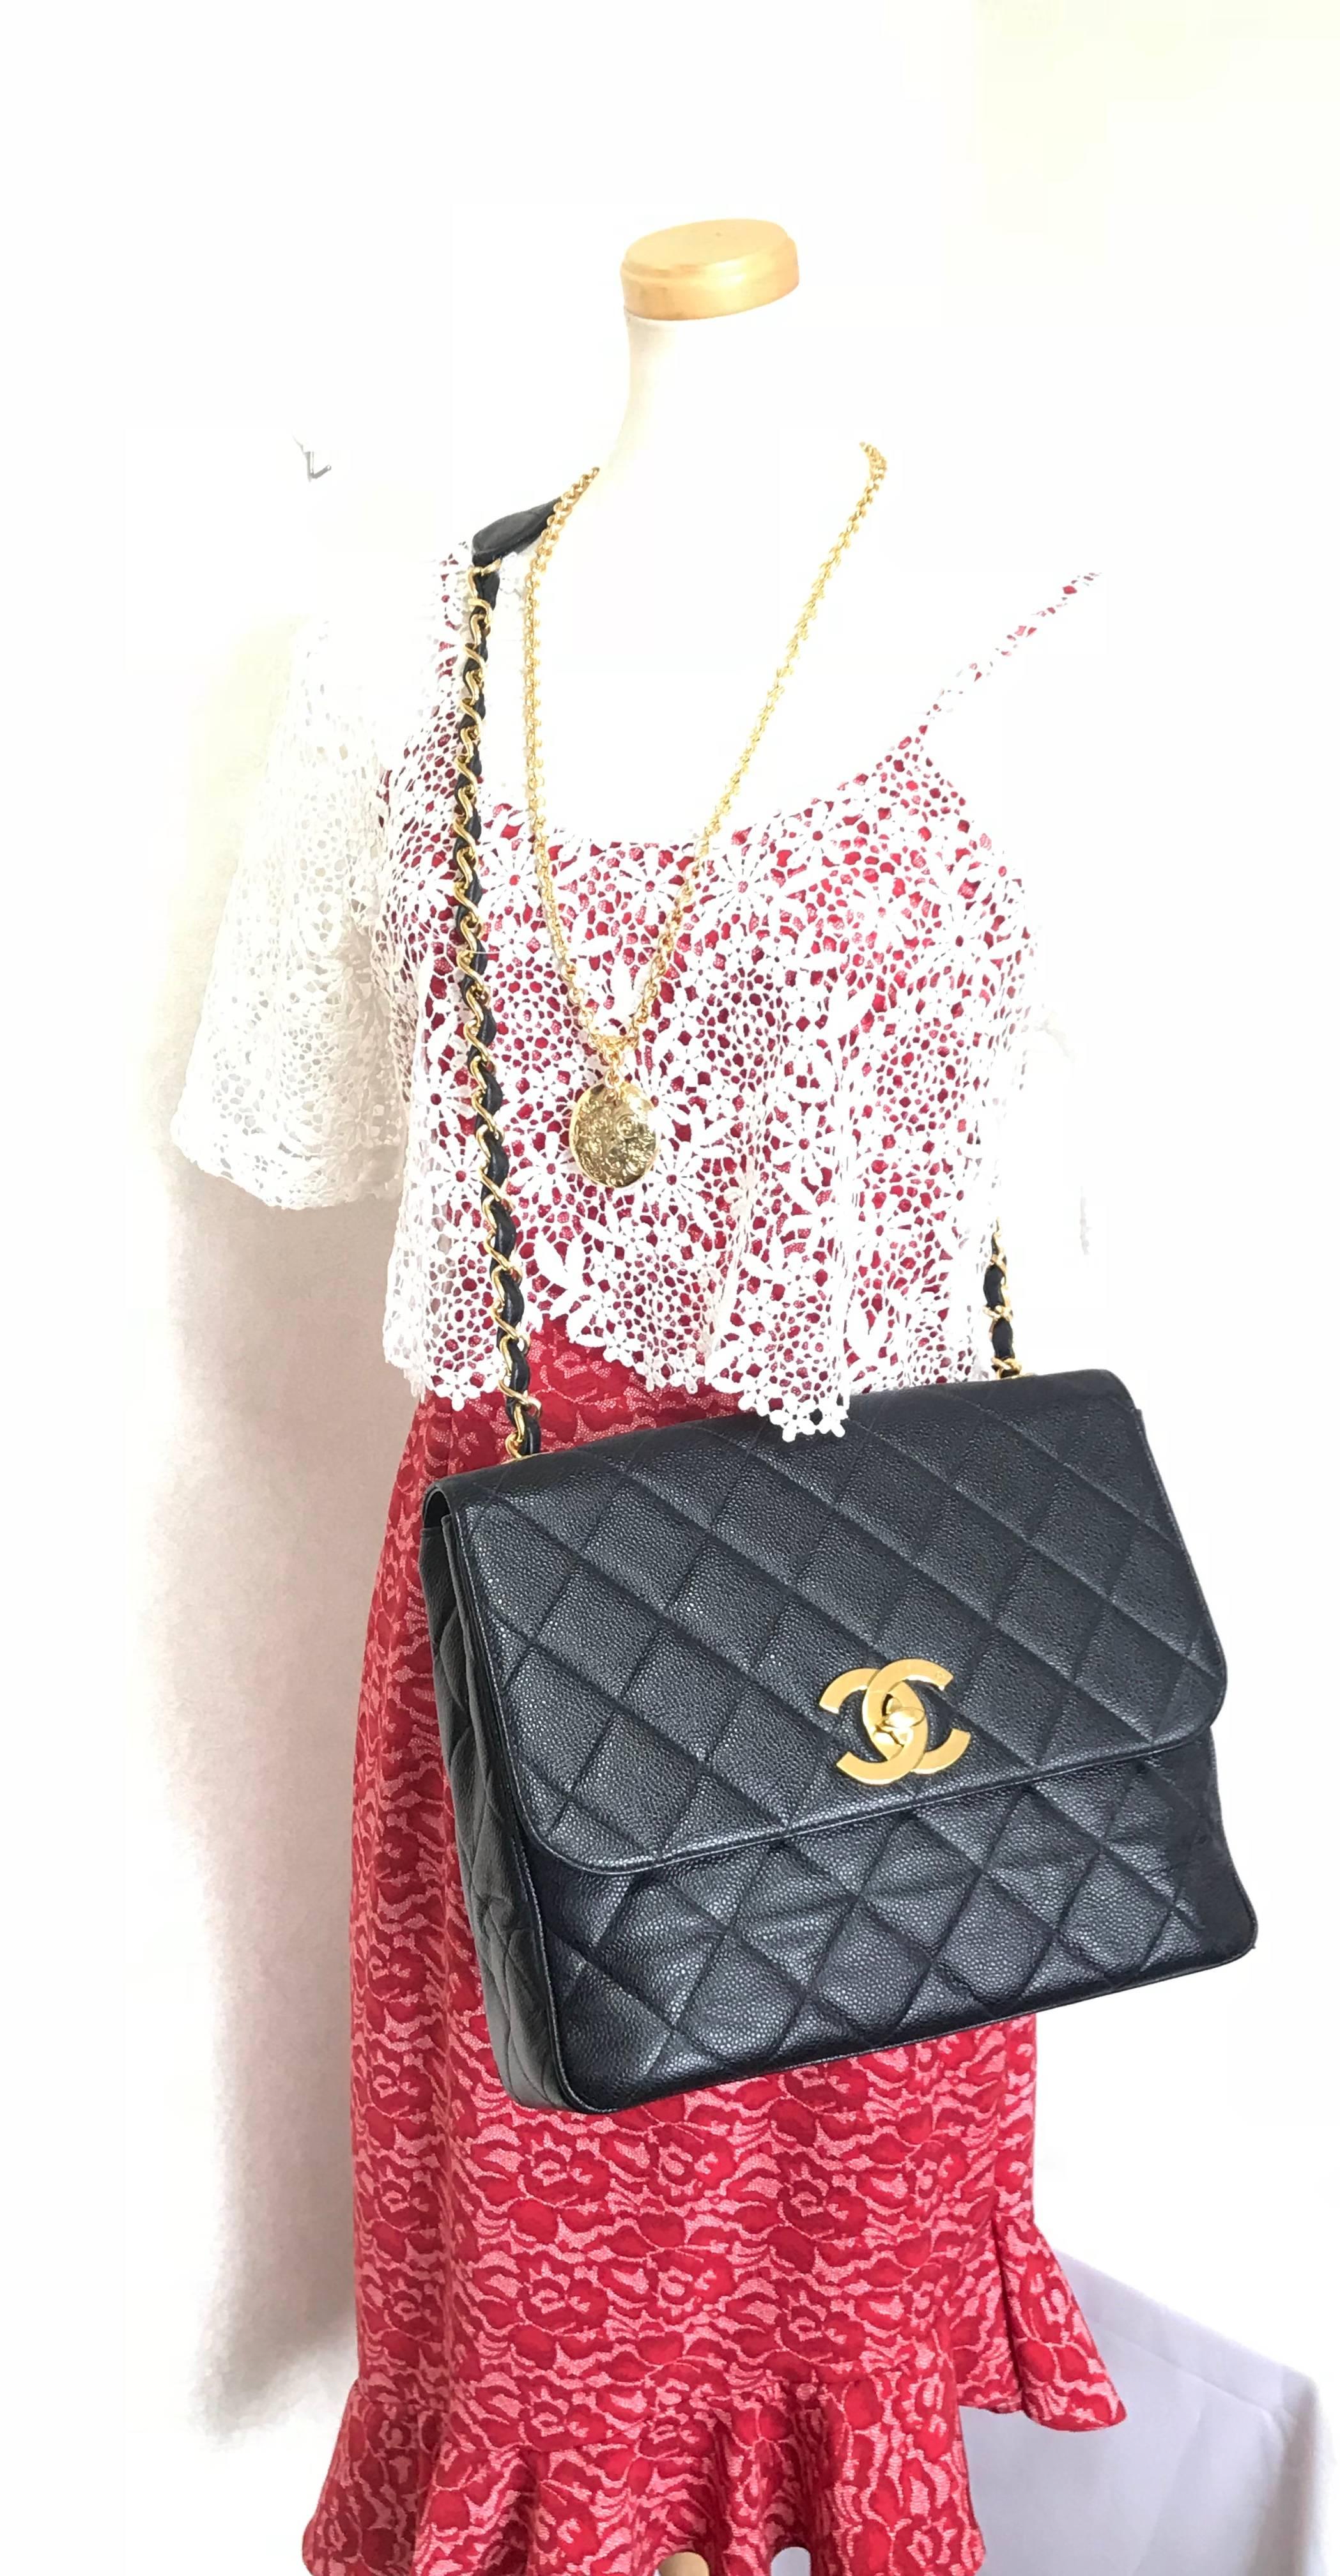 1990s. Vintage Chanel classic large black caviar leather 2.55 square shape chain shoulder bag with golden large CC closure. Must have purse.

***Smaller version in White and Beige is also for sale ***


Introducing a vintage Chanel classic 2.55